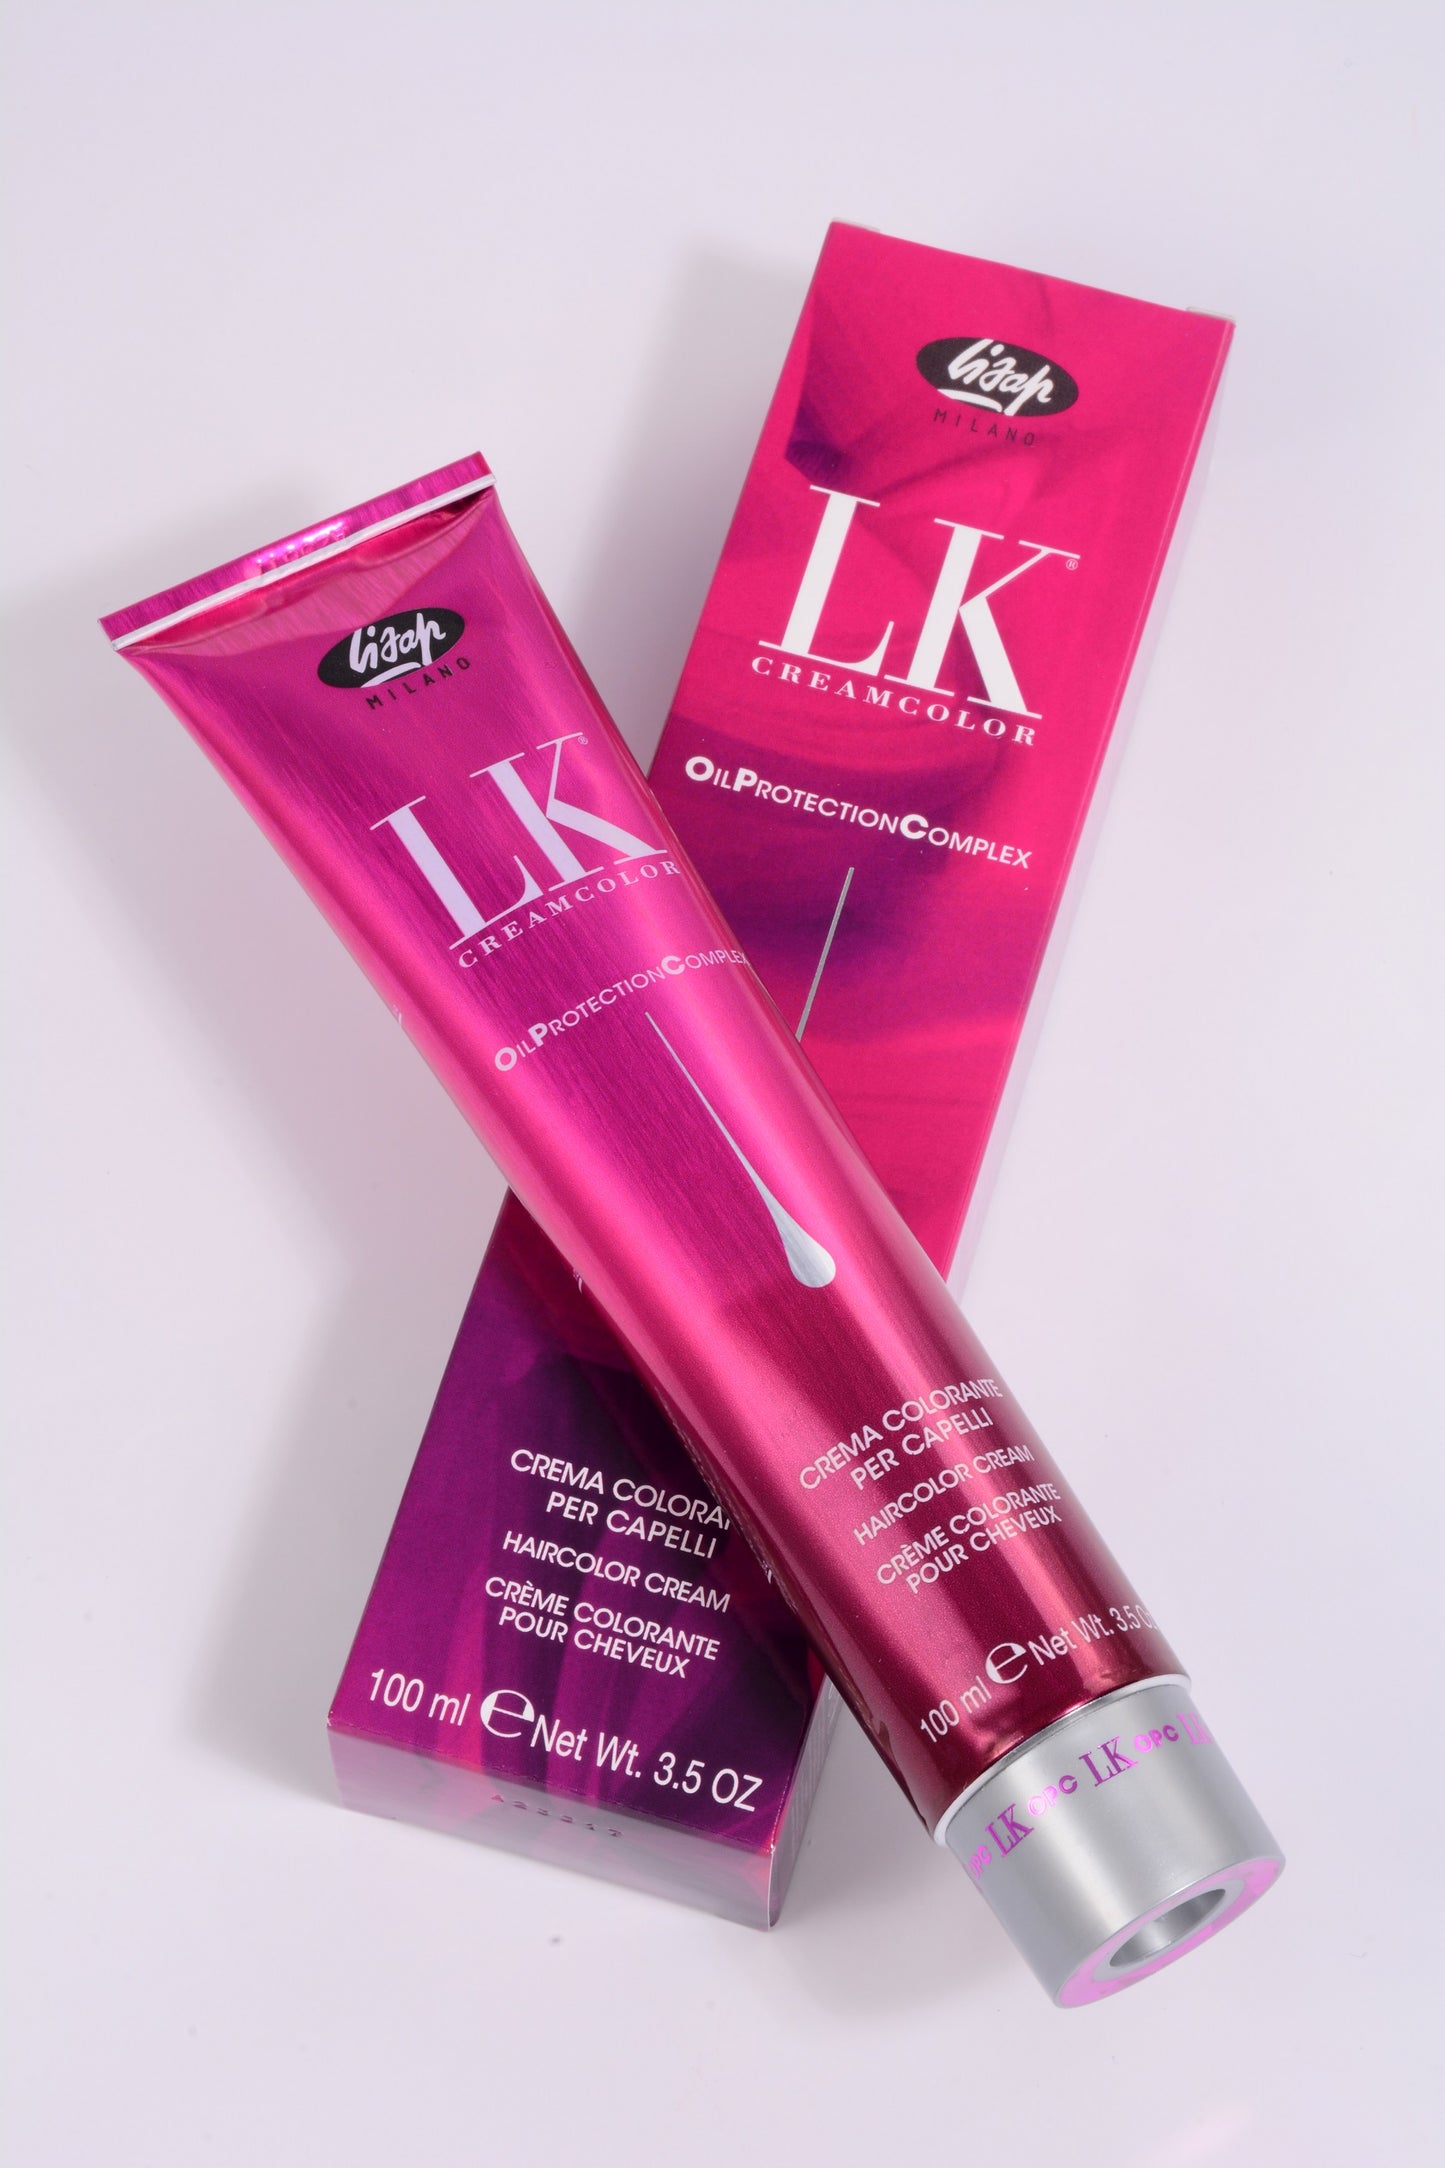 LK Creamcolor 7/63 Oil Protection Complex